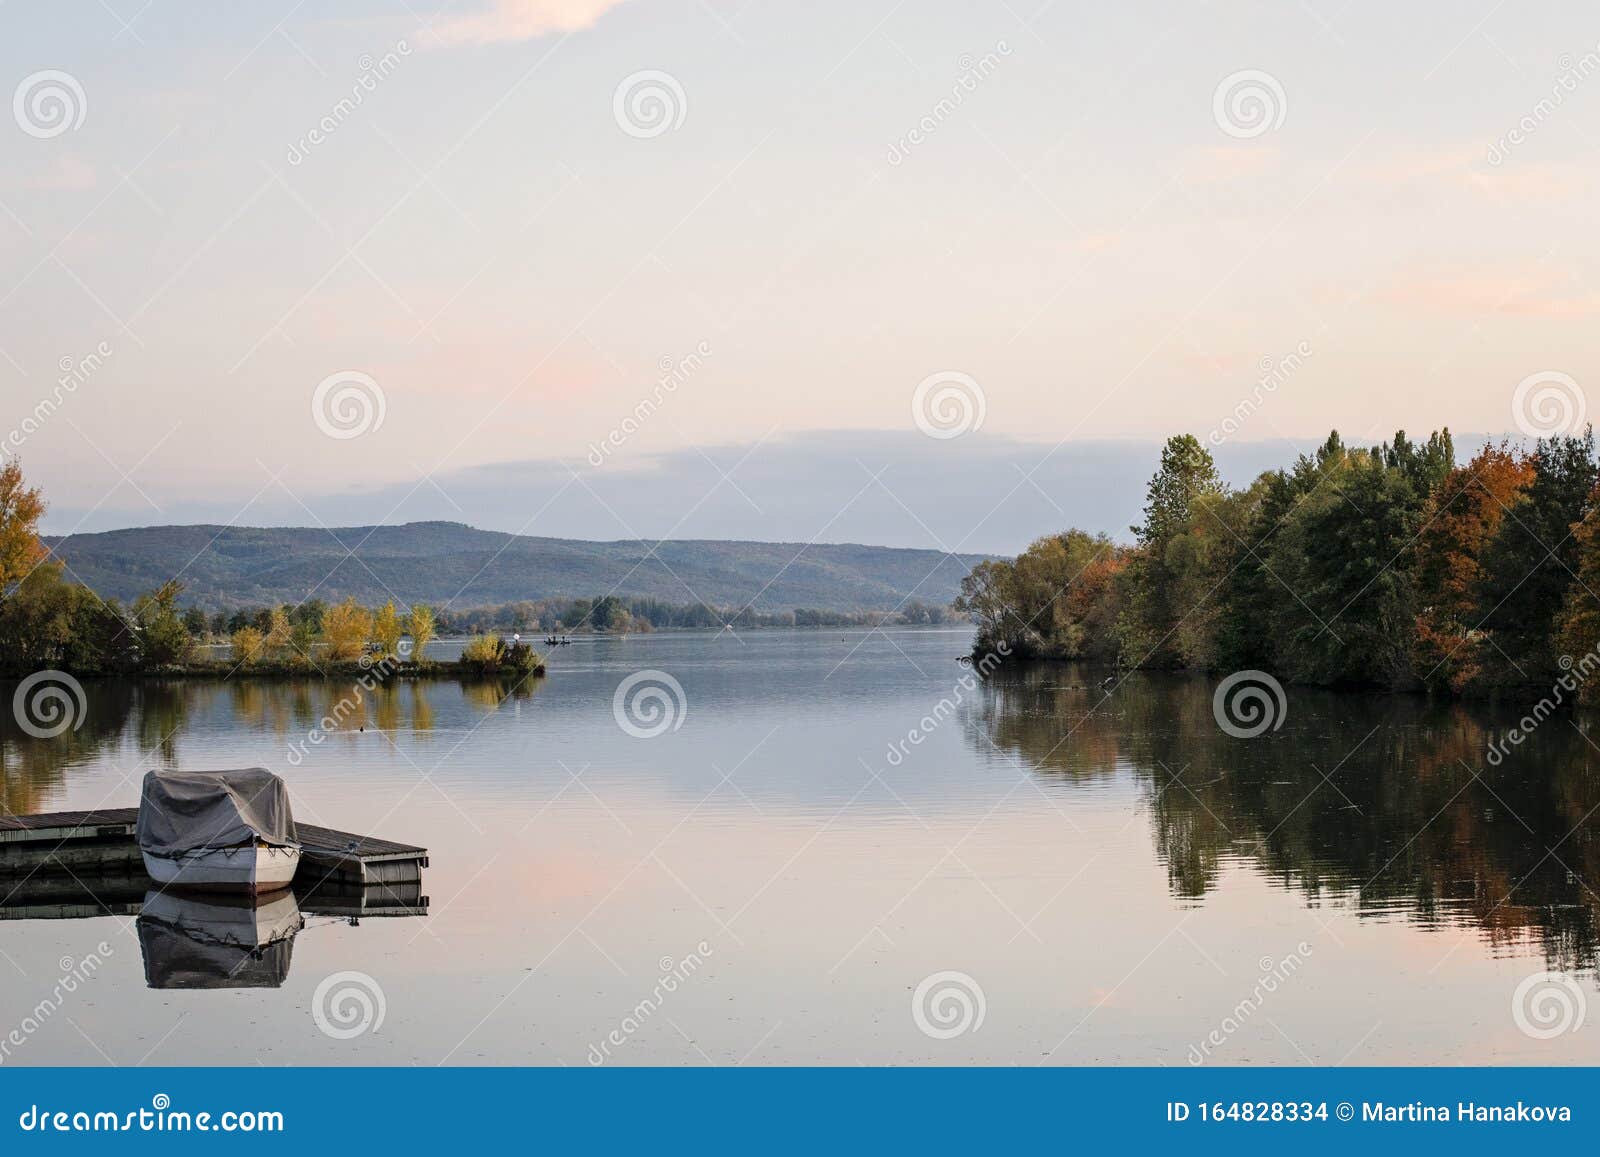 idyllic sunset over lake in autumn. sunset boat on lake. colorful trees reflection in the water. lake slnava, piestany, slovakia.